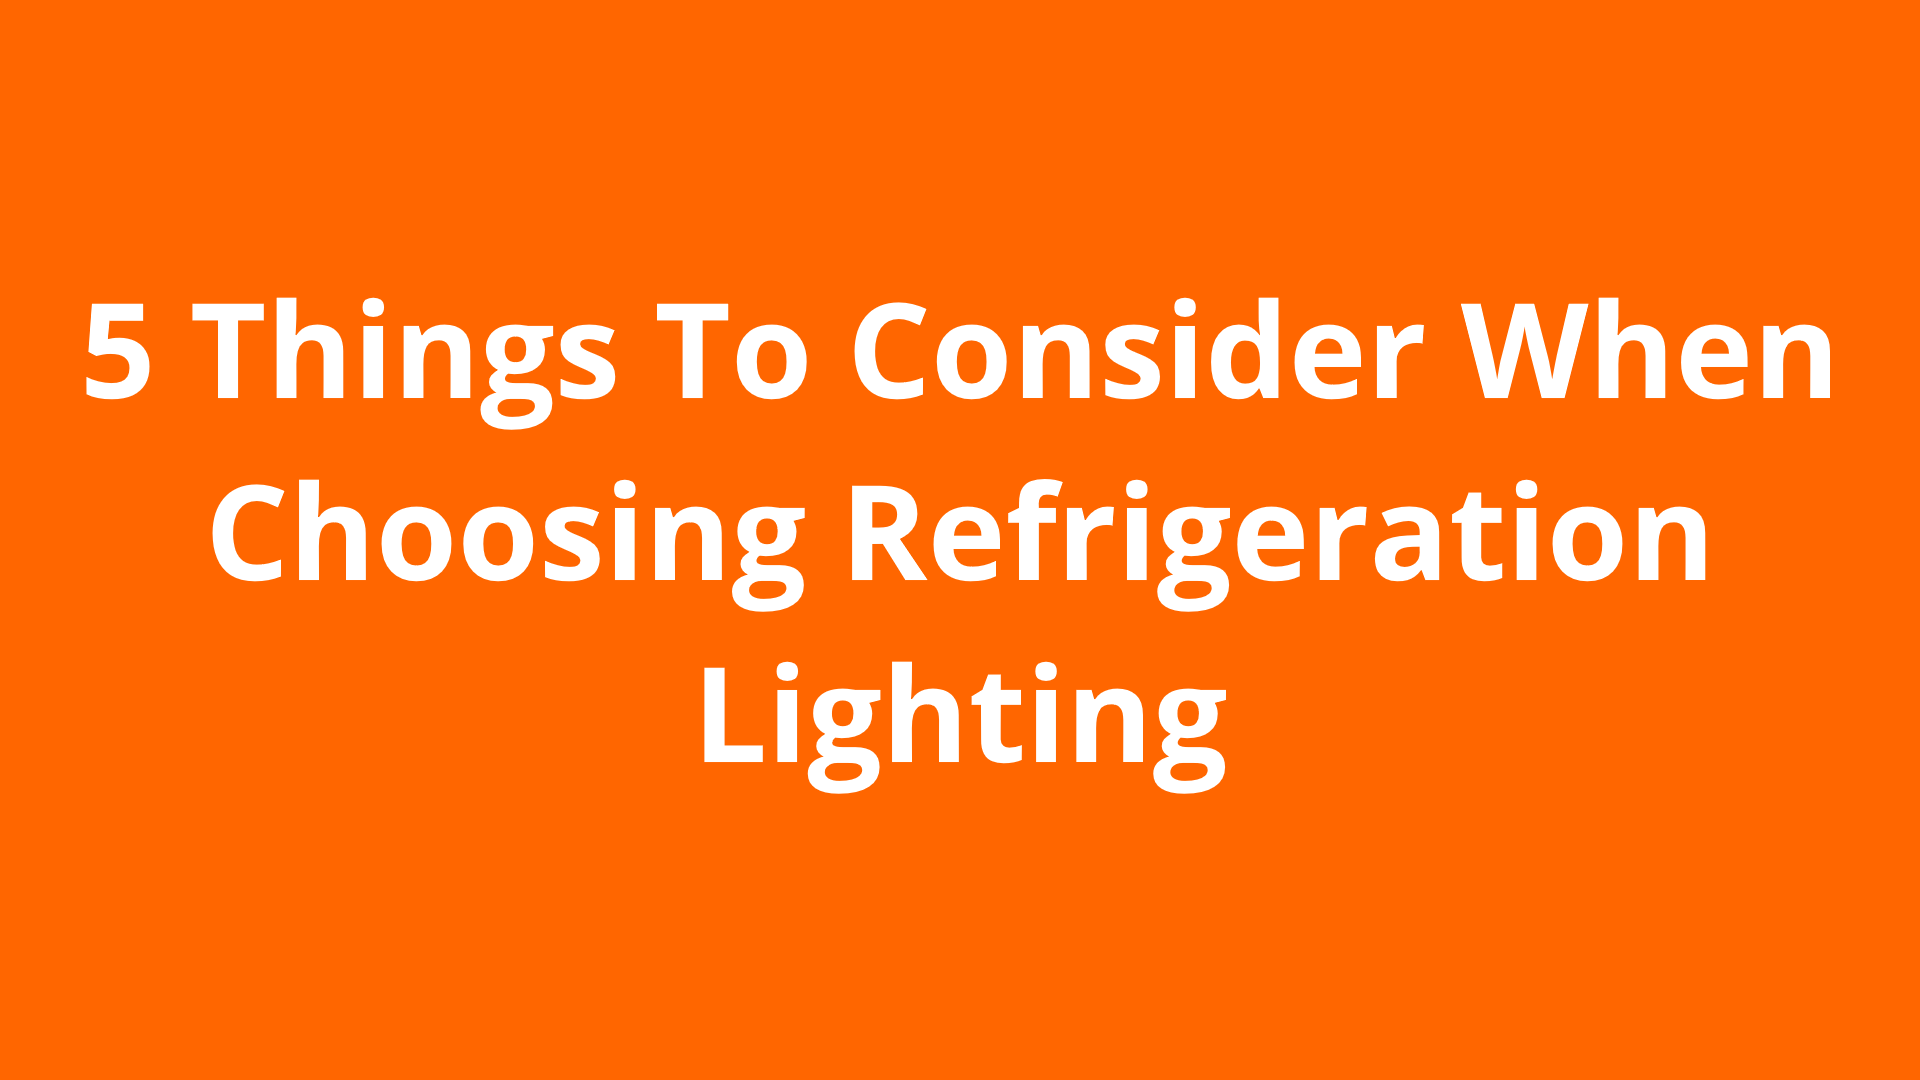 5 Things To Consider When Choosing Refrigeration Lighting